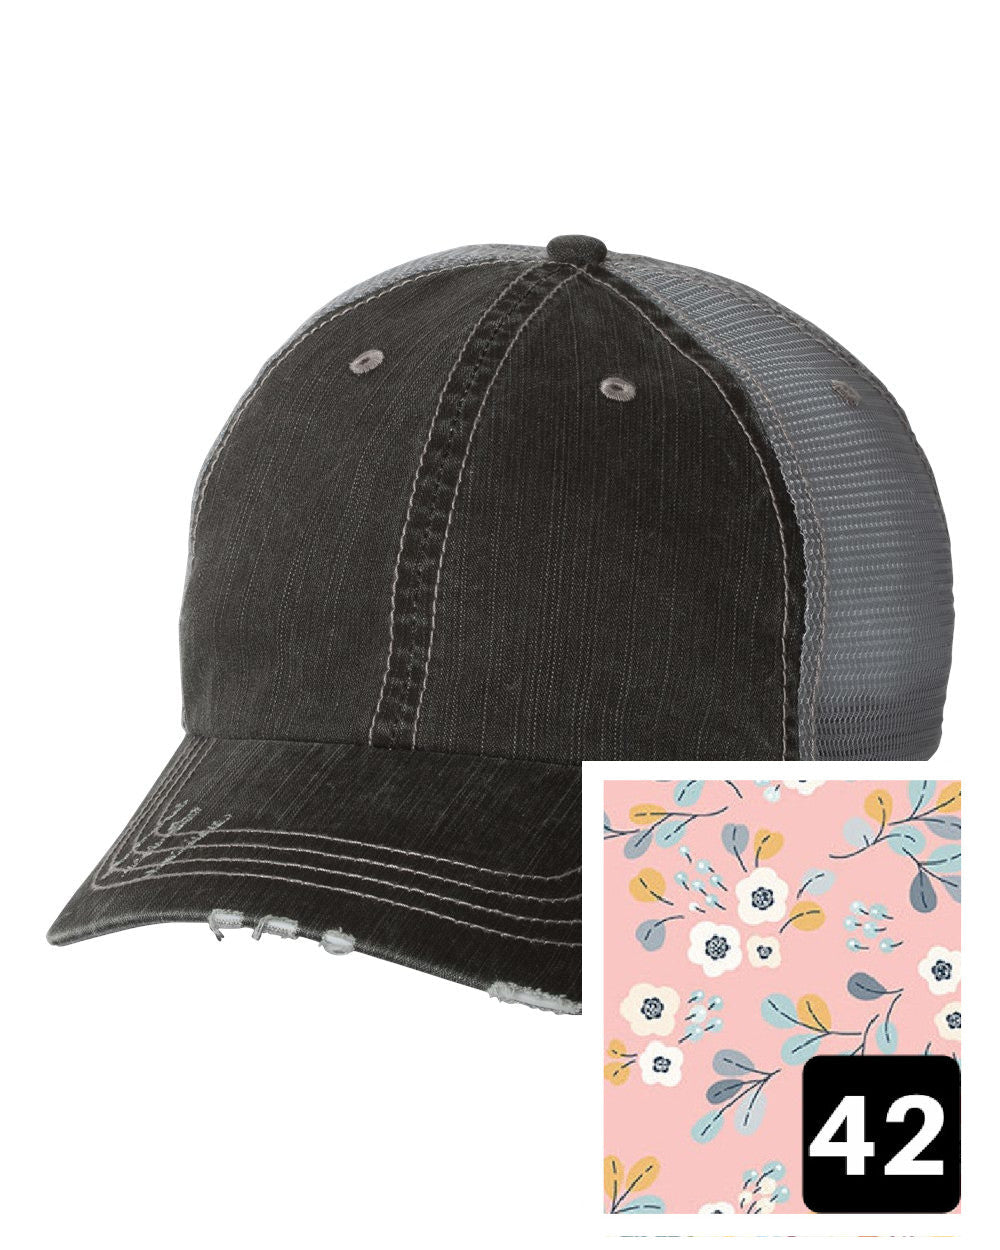 gray distressed trucker hat with light blue and pink mosaic fabric state of Louisiana